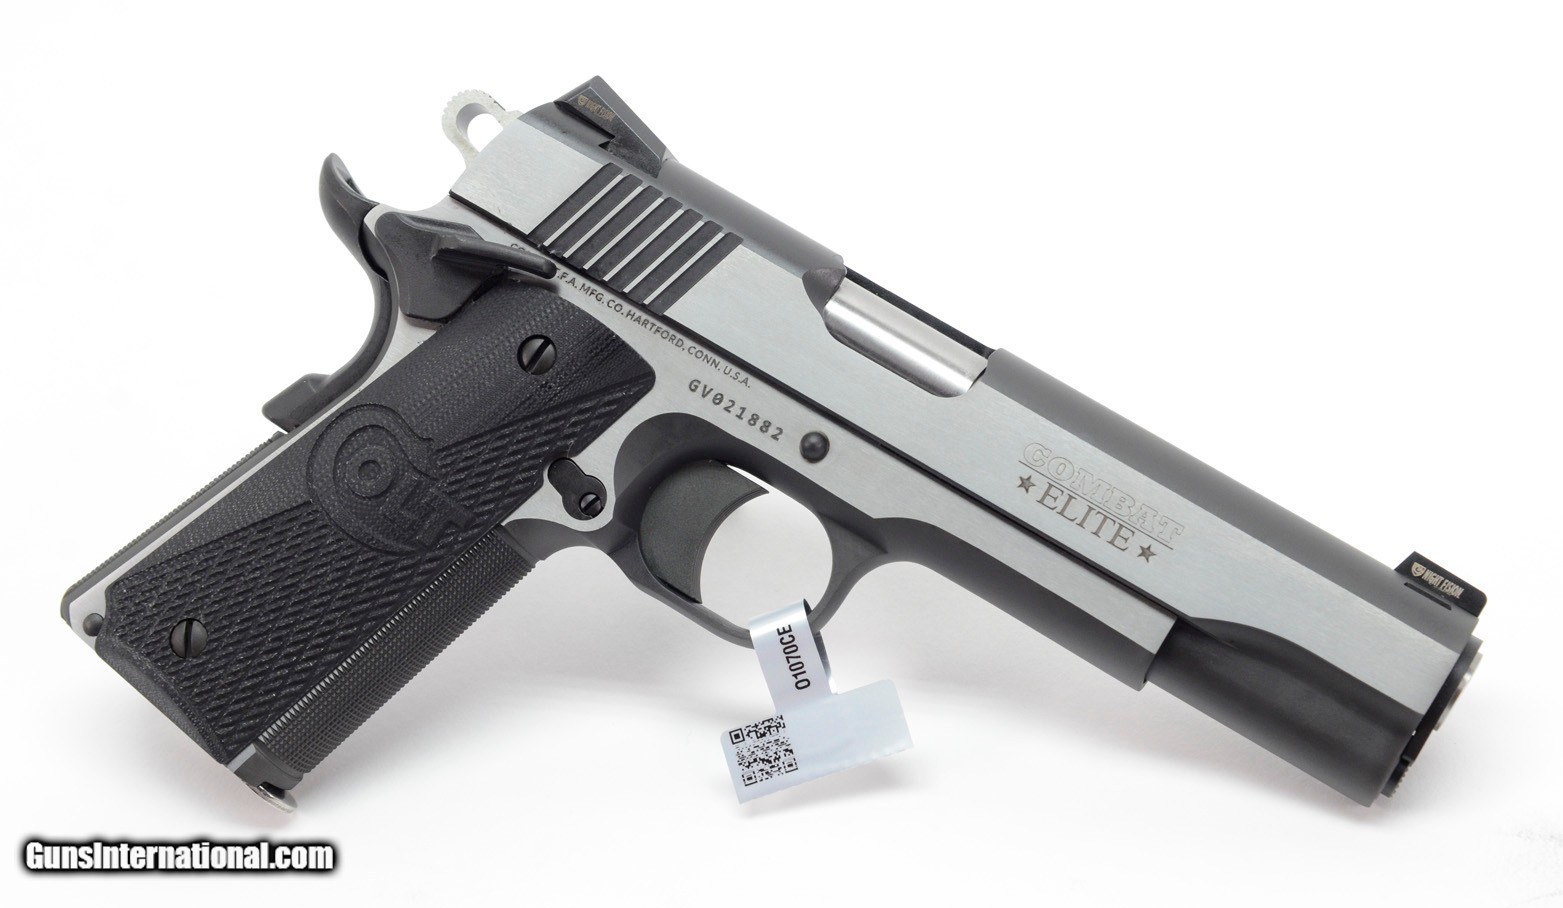 Colt Combat Elite Government .45 ACP. Series 80. Stainless Finish. BRAND  NEW in Hard Case.